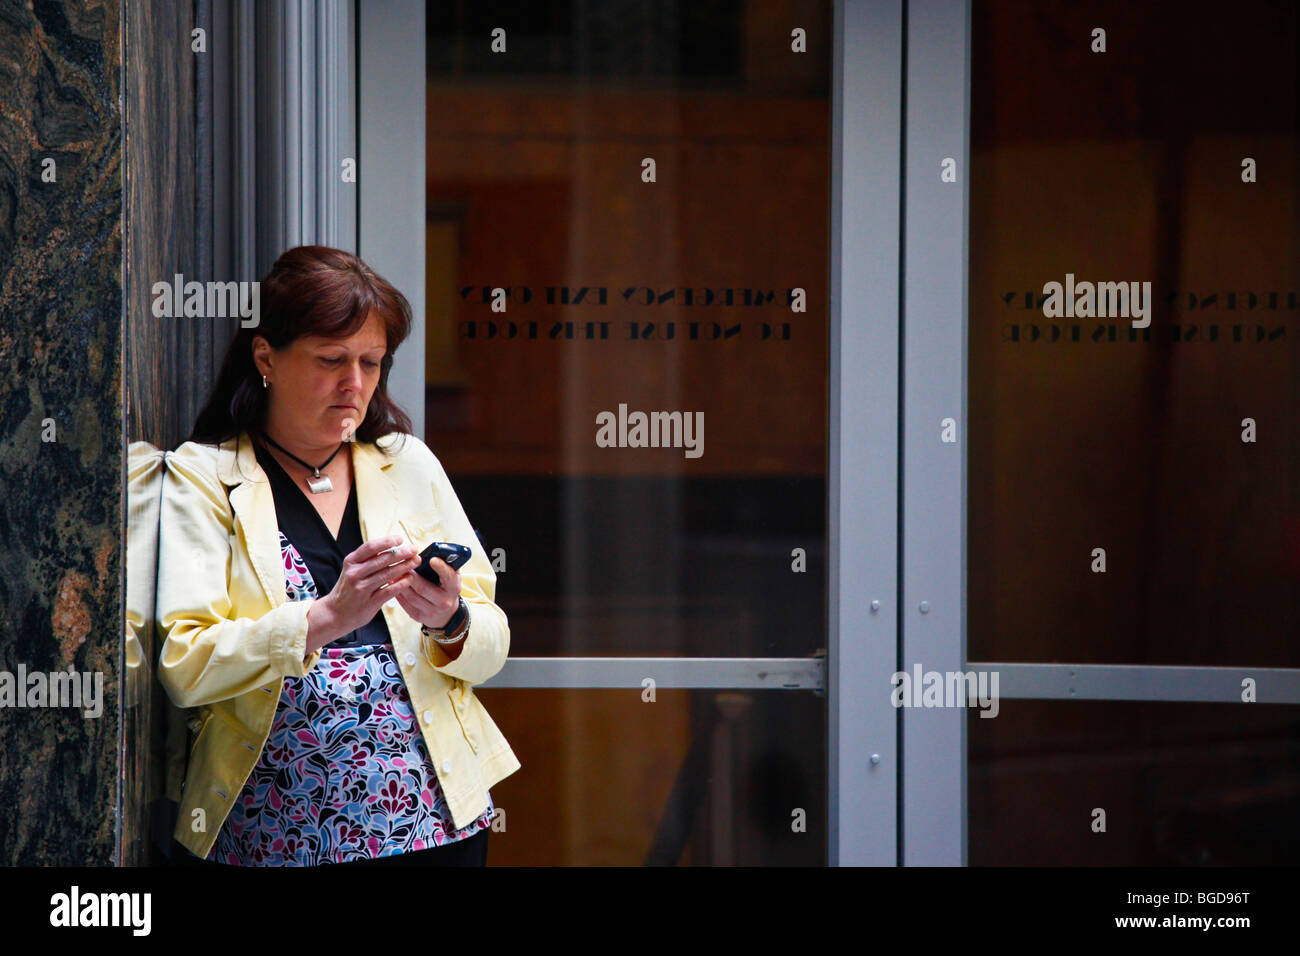 Woman using a blackberry and smoking outside a building in downtown Manhattan, New York City Stock Photo